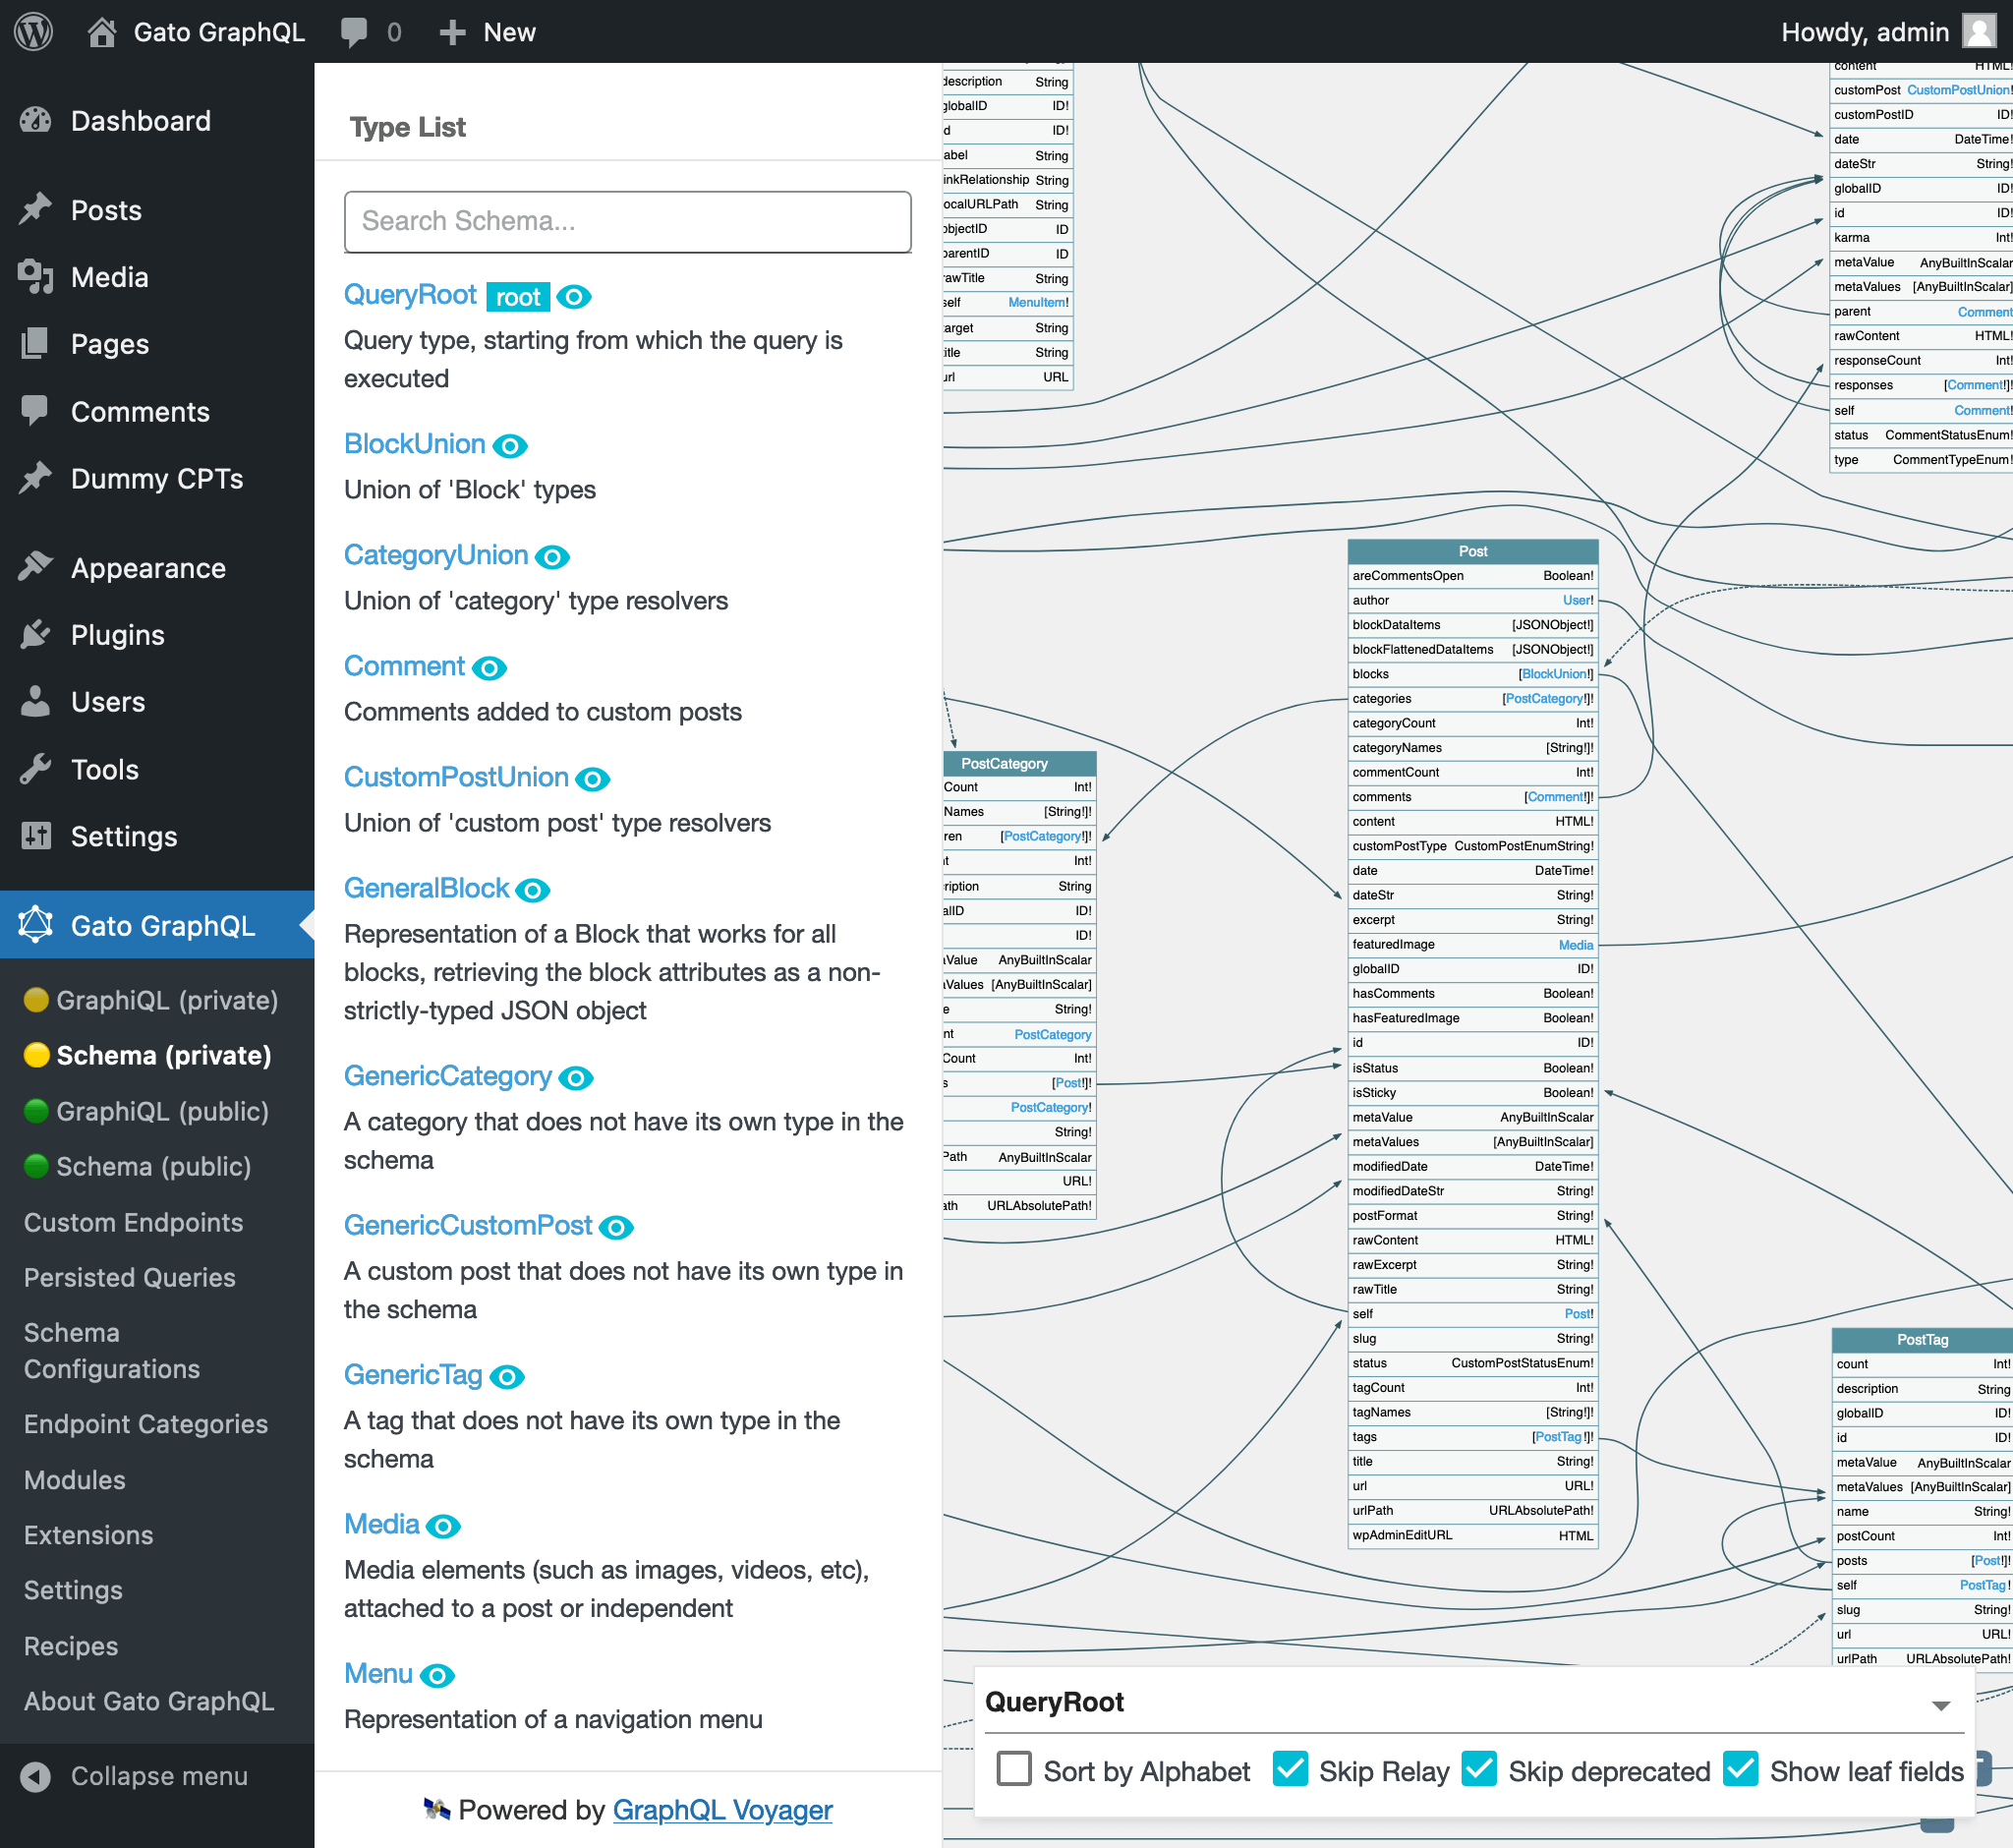 Interactively browse the private GraphQL schema, exploring all connections among entities